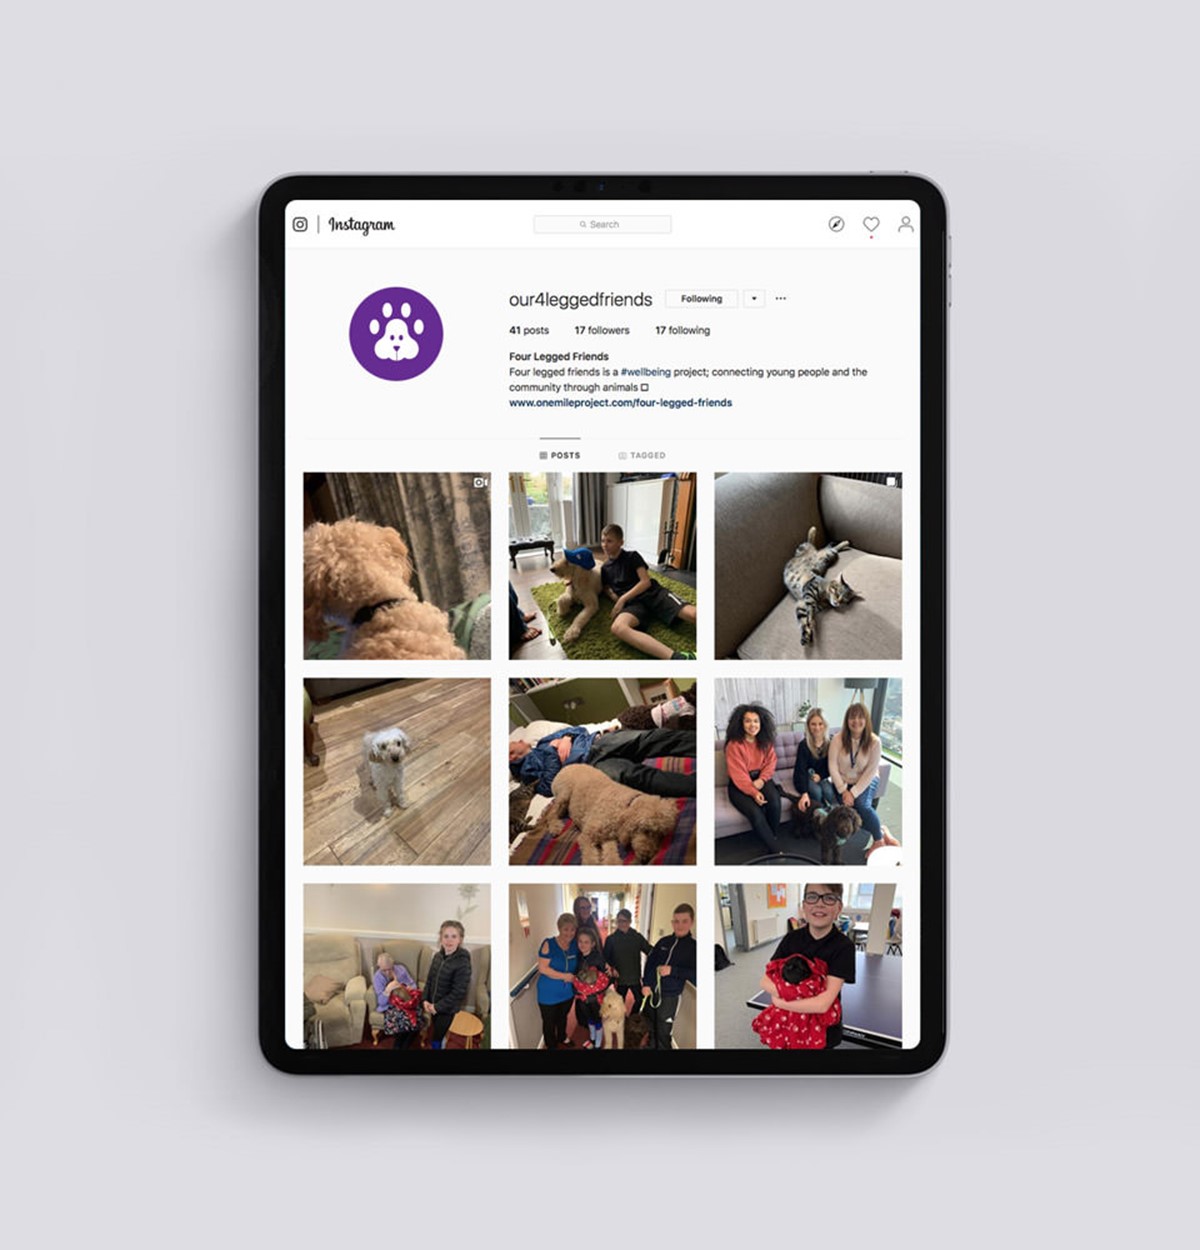 4 Legged Friends instagram page on an iPad. Identity design by Superfried.